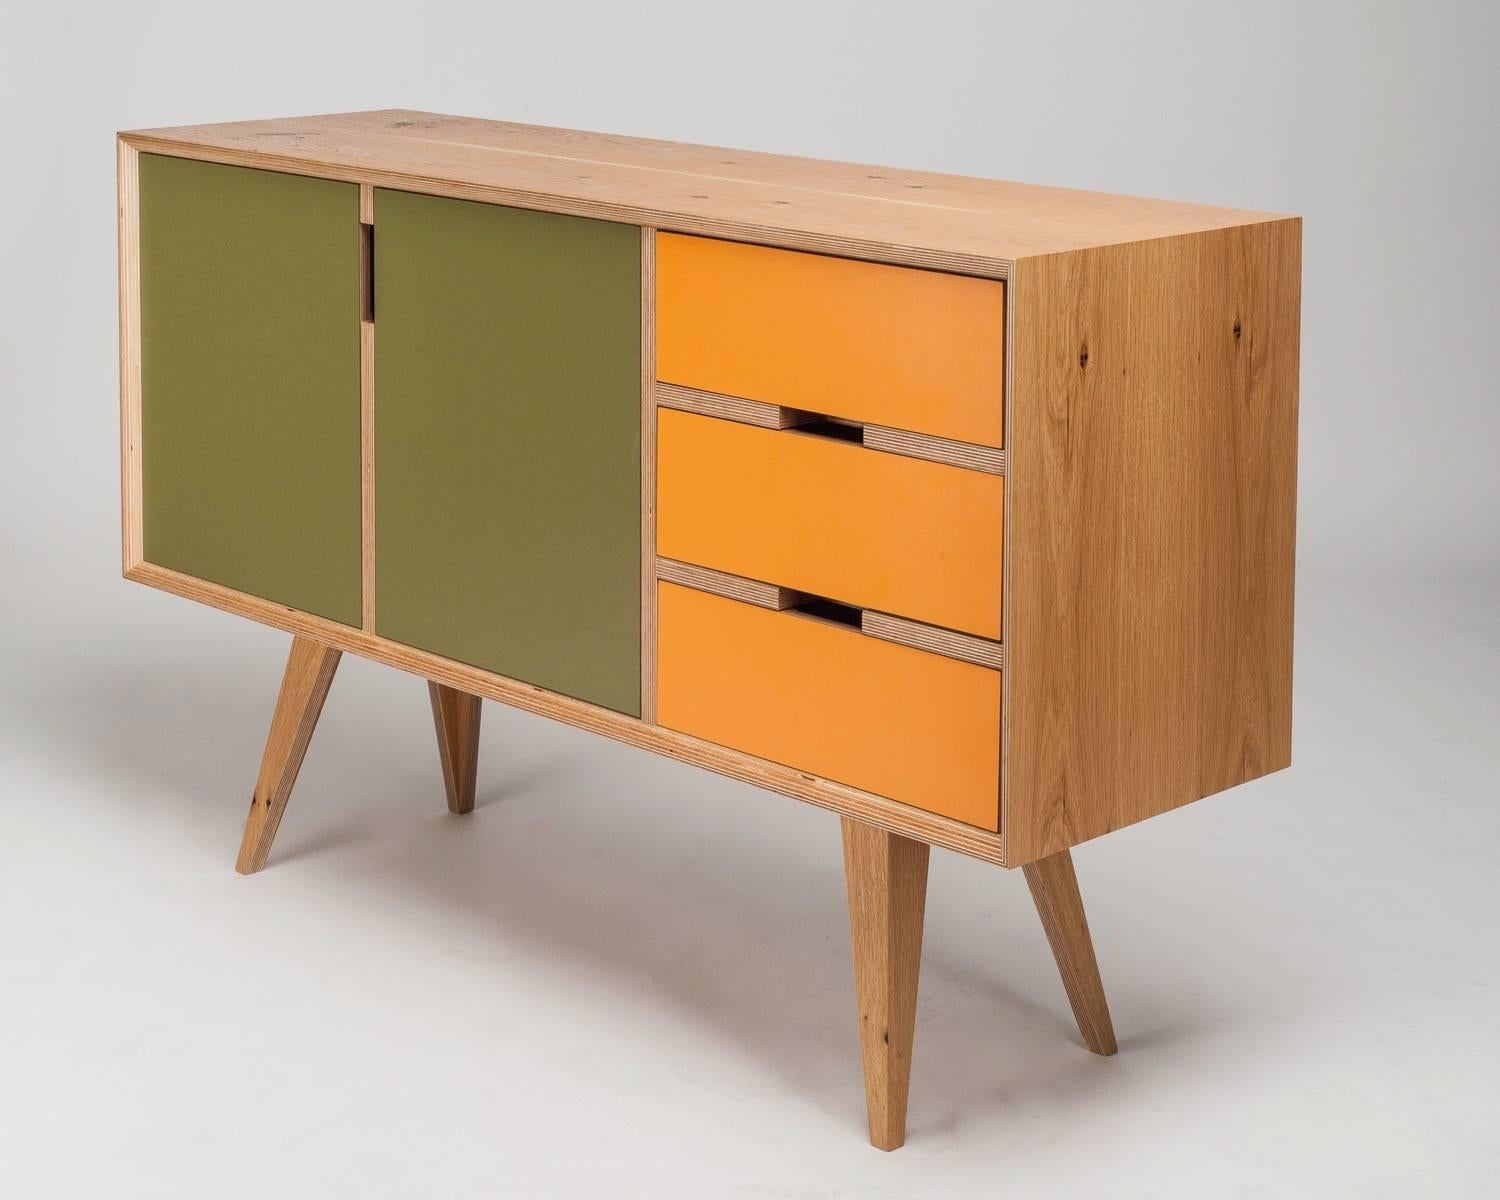 The Otto sideboard is handcrafted and made to order, so veneer finishes, colored door fronts and dimensions can be altered.
Seen here in European oak with olive green and yellowy orange.